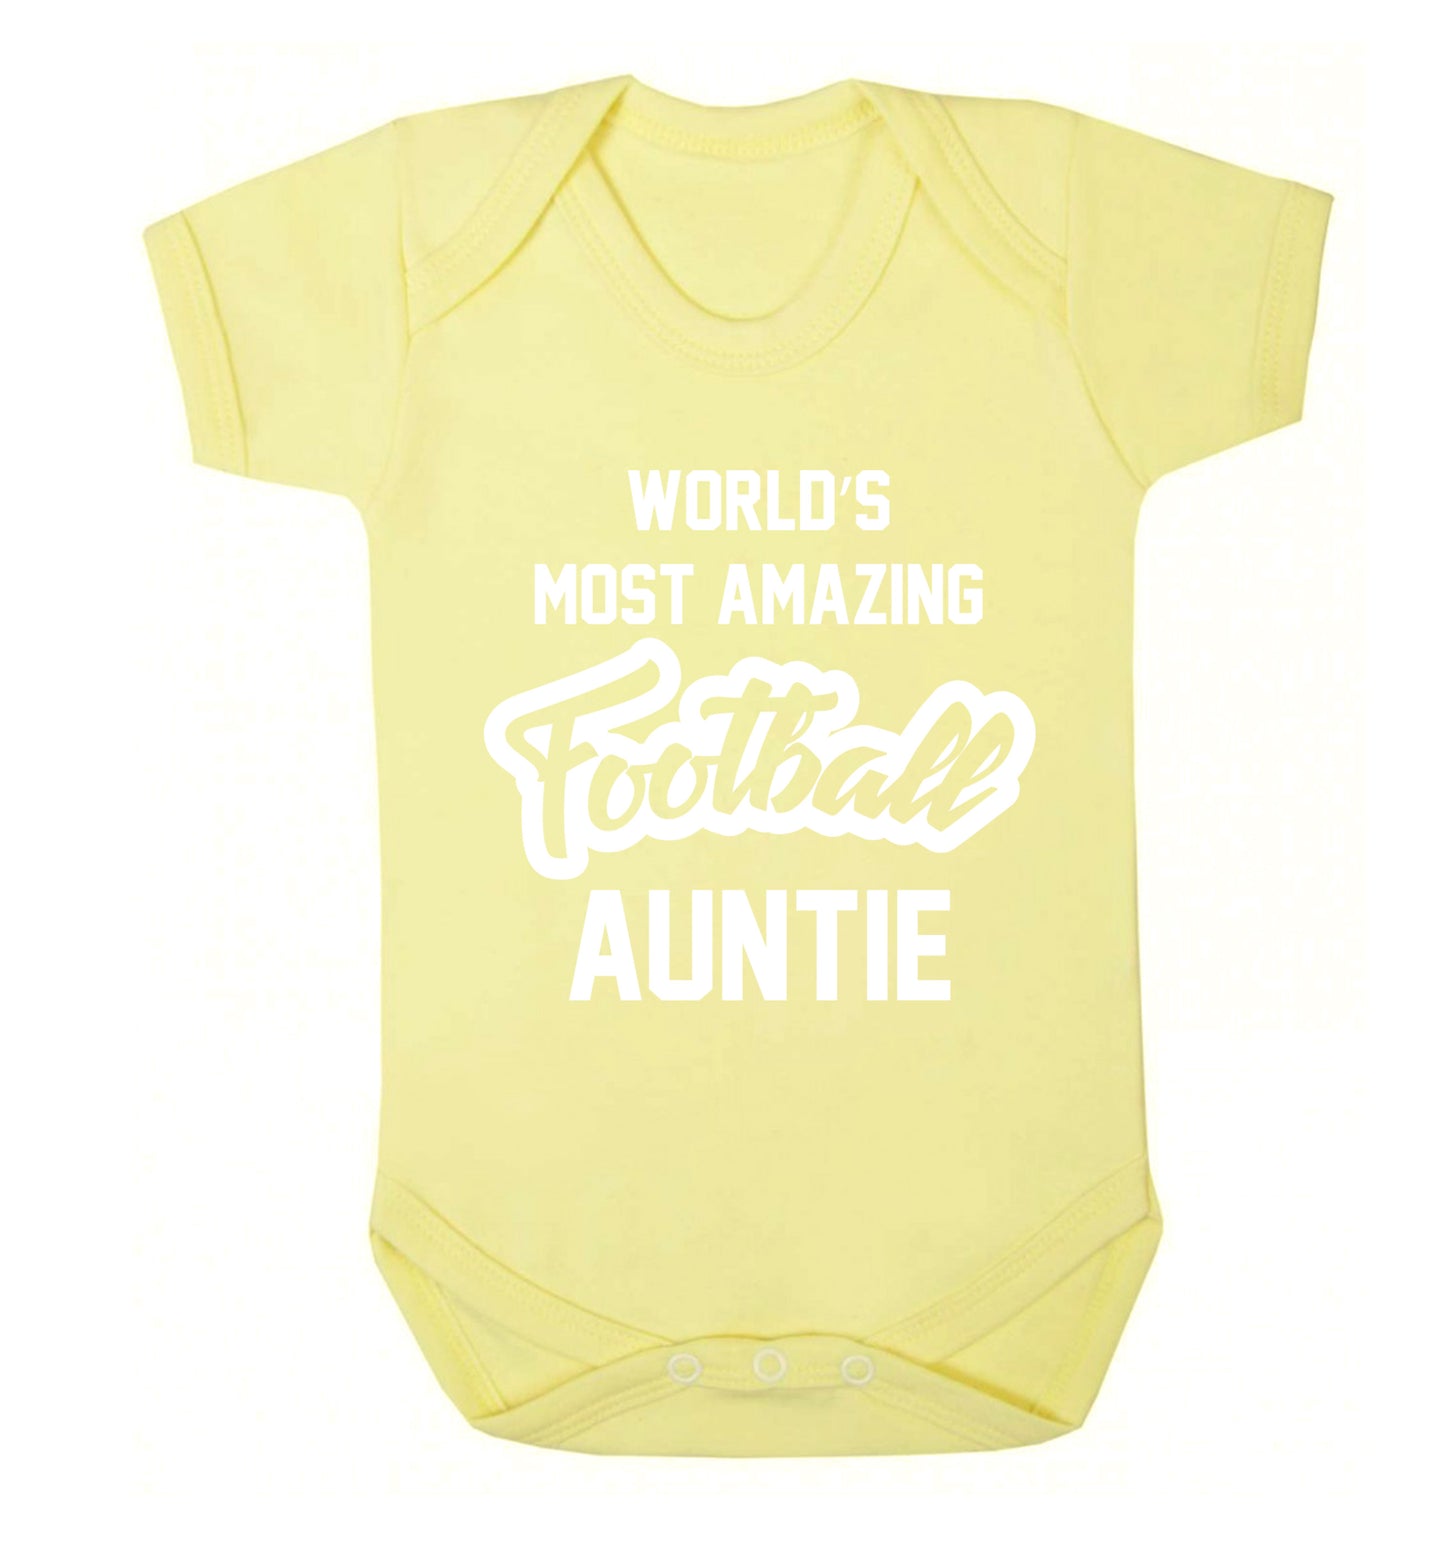 Worlds most amazing football auntie Baby Vest pale yellow 18-24 months